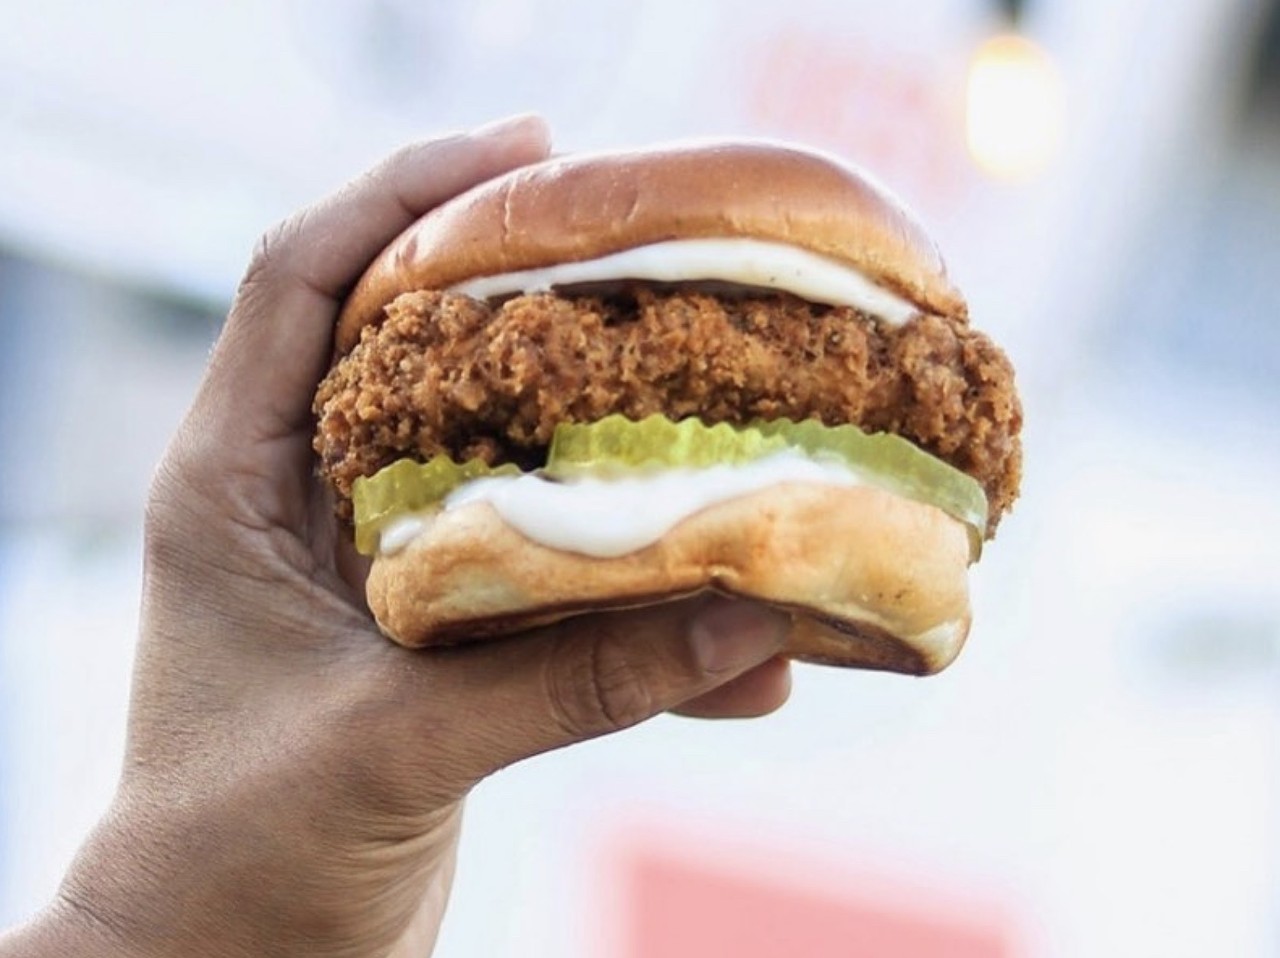 Project Pollo
Multiple Locations
Project Pollo, a San Antonio-based vegan chain based on a menu of faux-chicken options, closed its doors this April after it was purchased by a franchise group. Founder Lucas Bradbury stated that all San Antonio stores, including one rebranded as Side Chicks, would close, calling it a “bittersweet moment.”